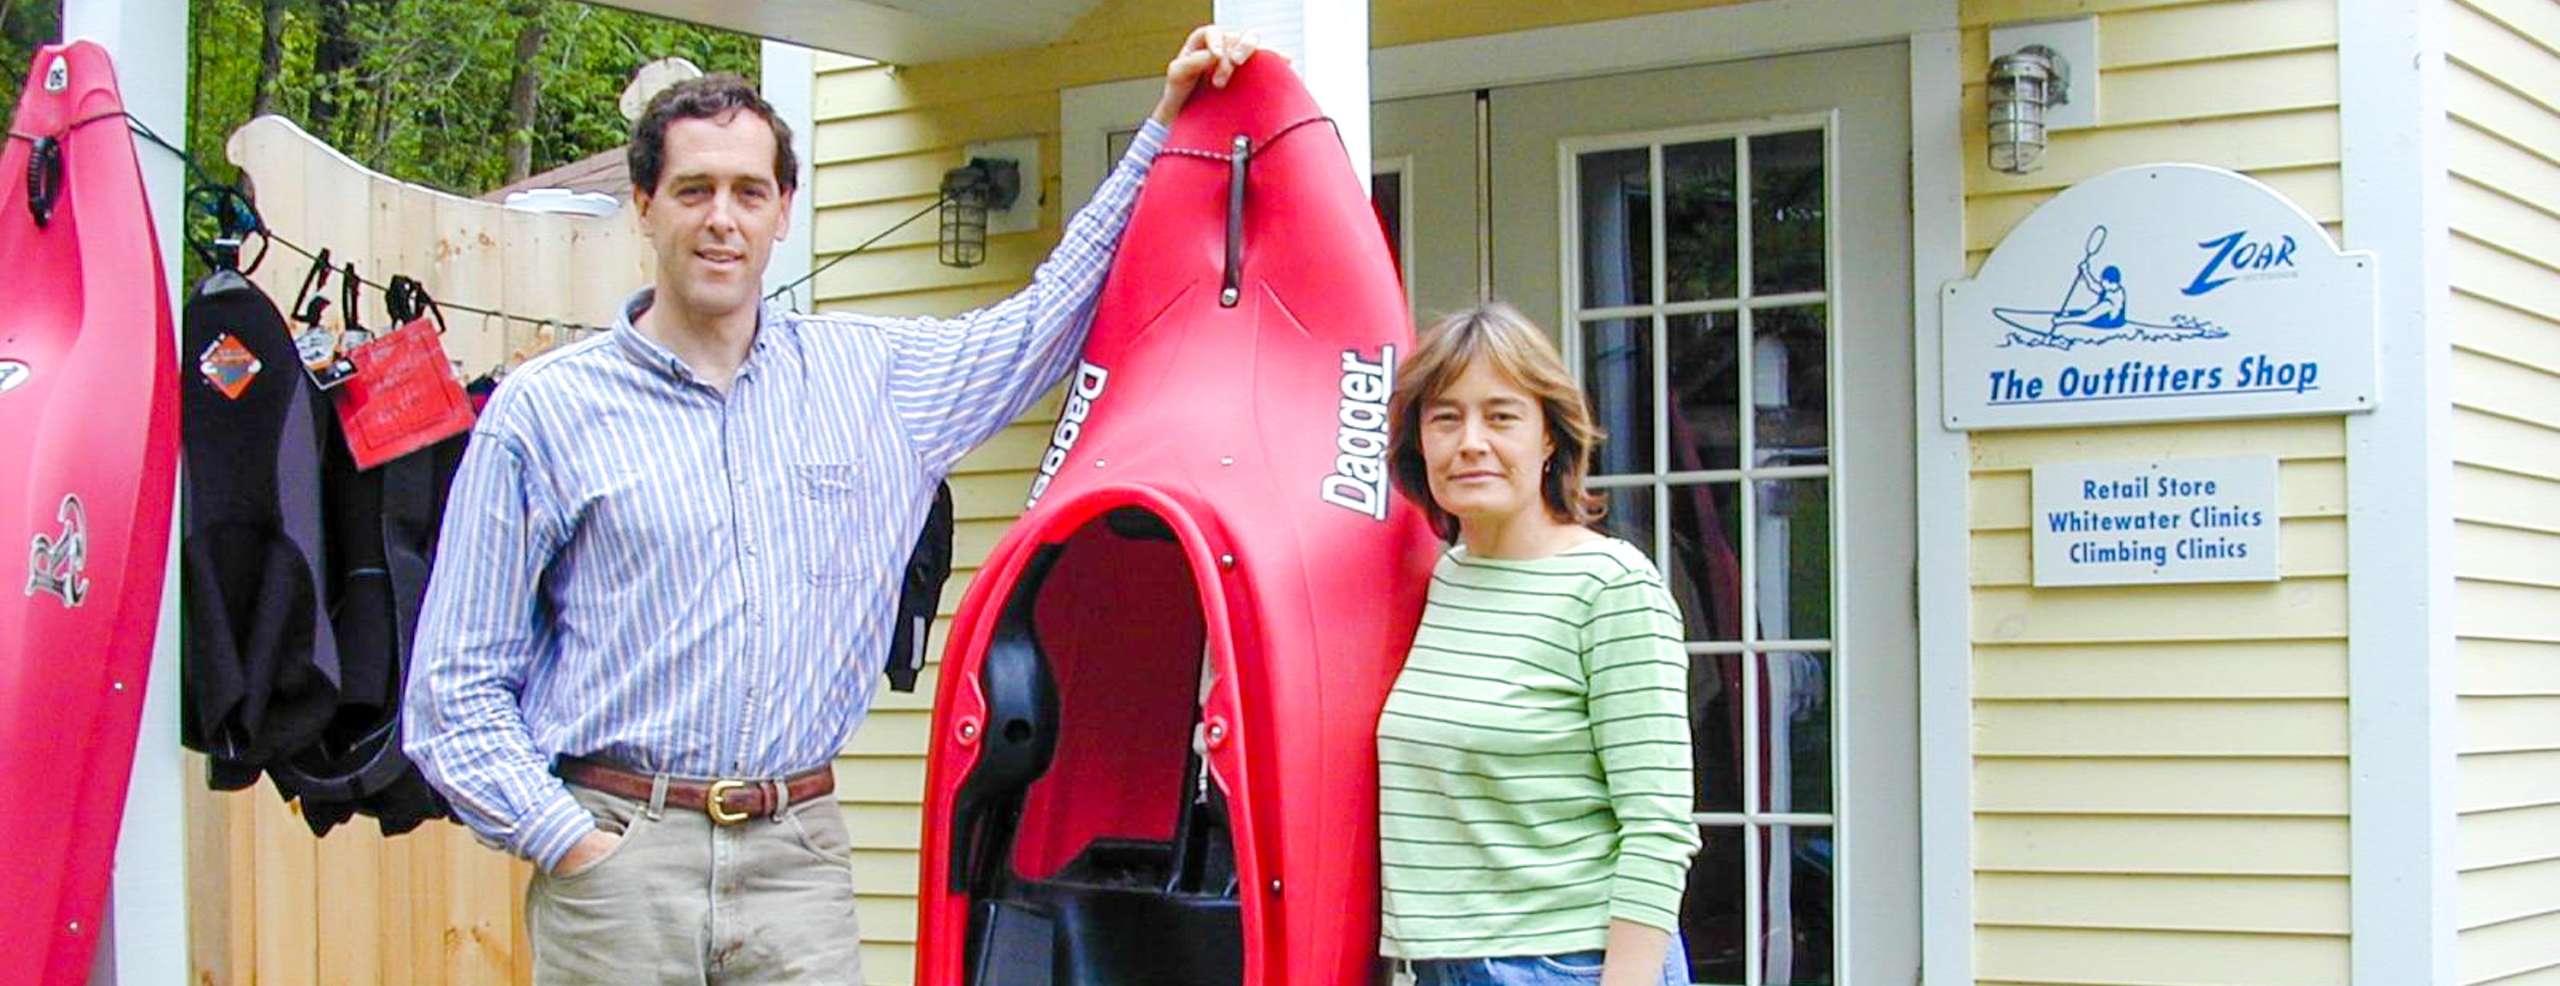 Founders Bruce and Karen standing by a kayak perched up against a house